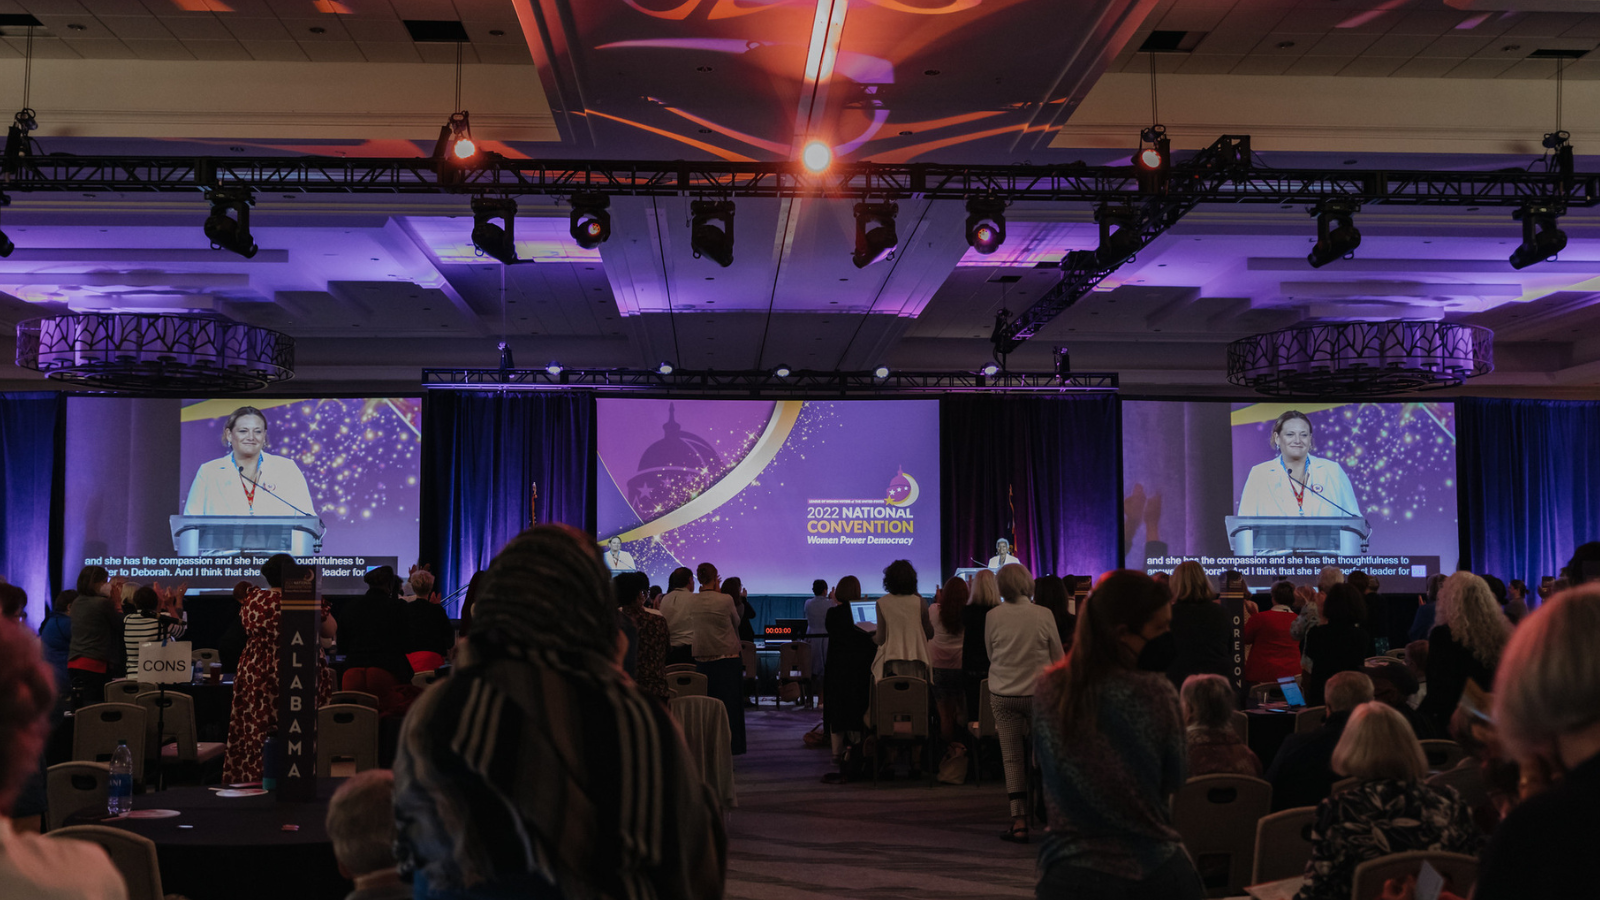 A photo of attendees in the ballroom at Convention 2022 in Denver, CO. The photographer is taking the picture from the back of the room, facing the stage. The crowd is featured in the image. The stage has three screens - the one in the middle has the Convention 2022 logo ("2022 National Convention: Women Power Democracy"). The two other screens on the right and left feature a LWVUS board member speaking on stage.